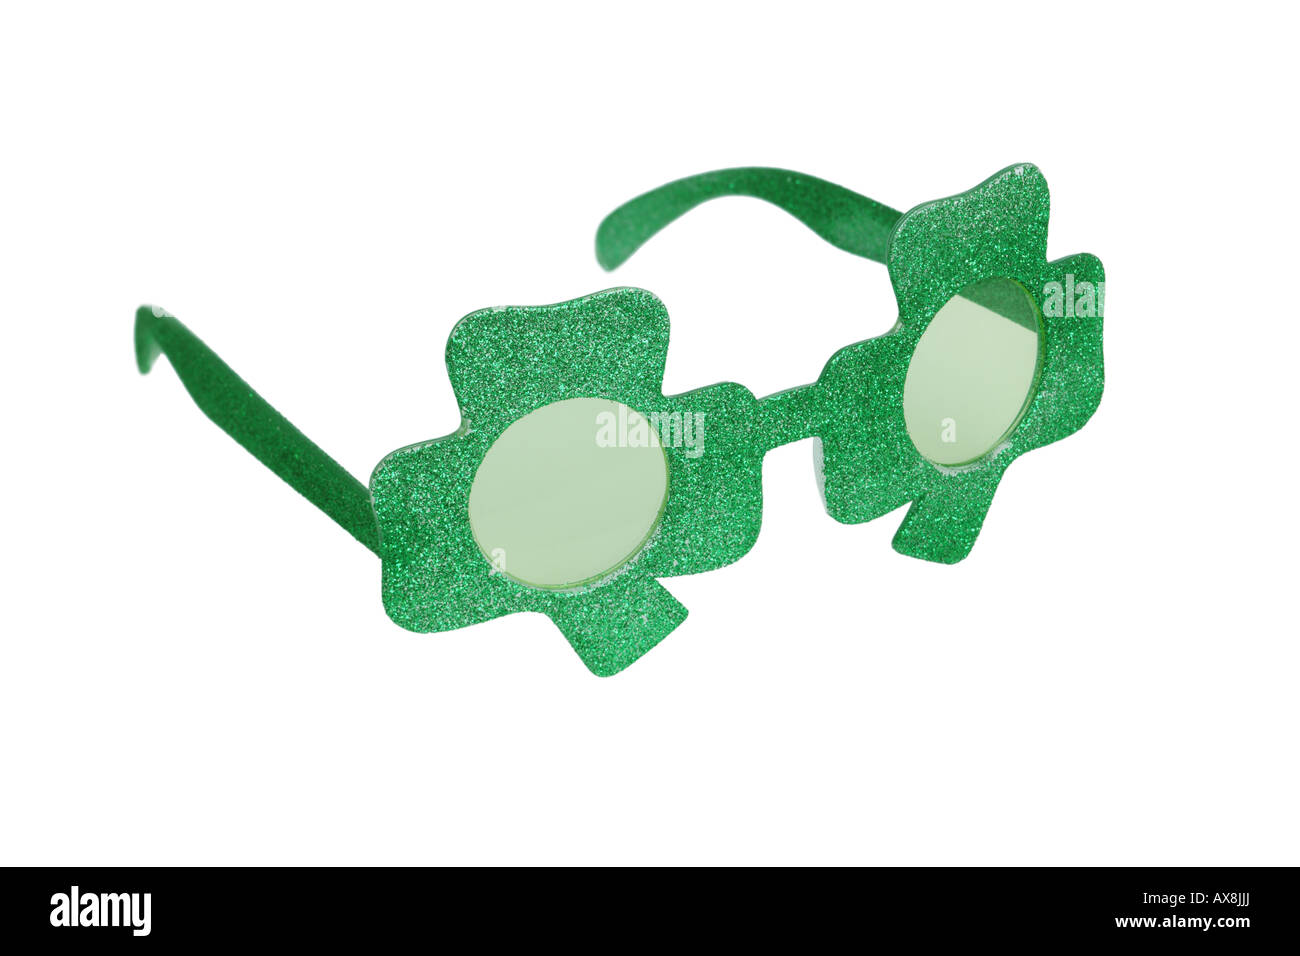 St Patrick s Day glasses cut out on white background Stock Photo